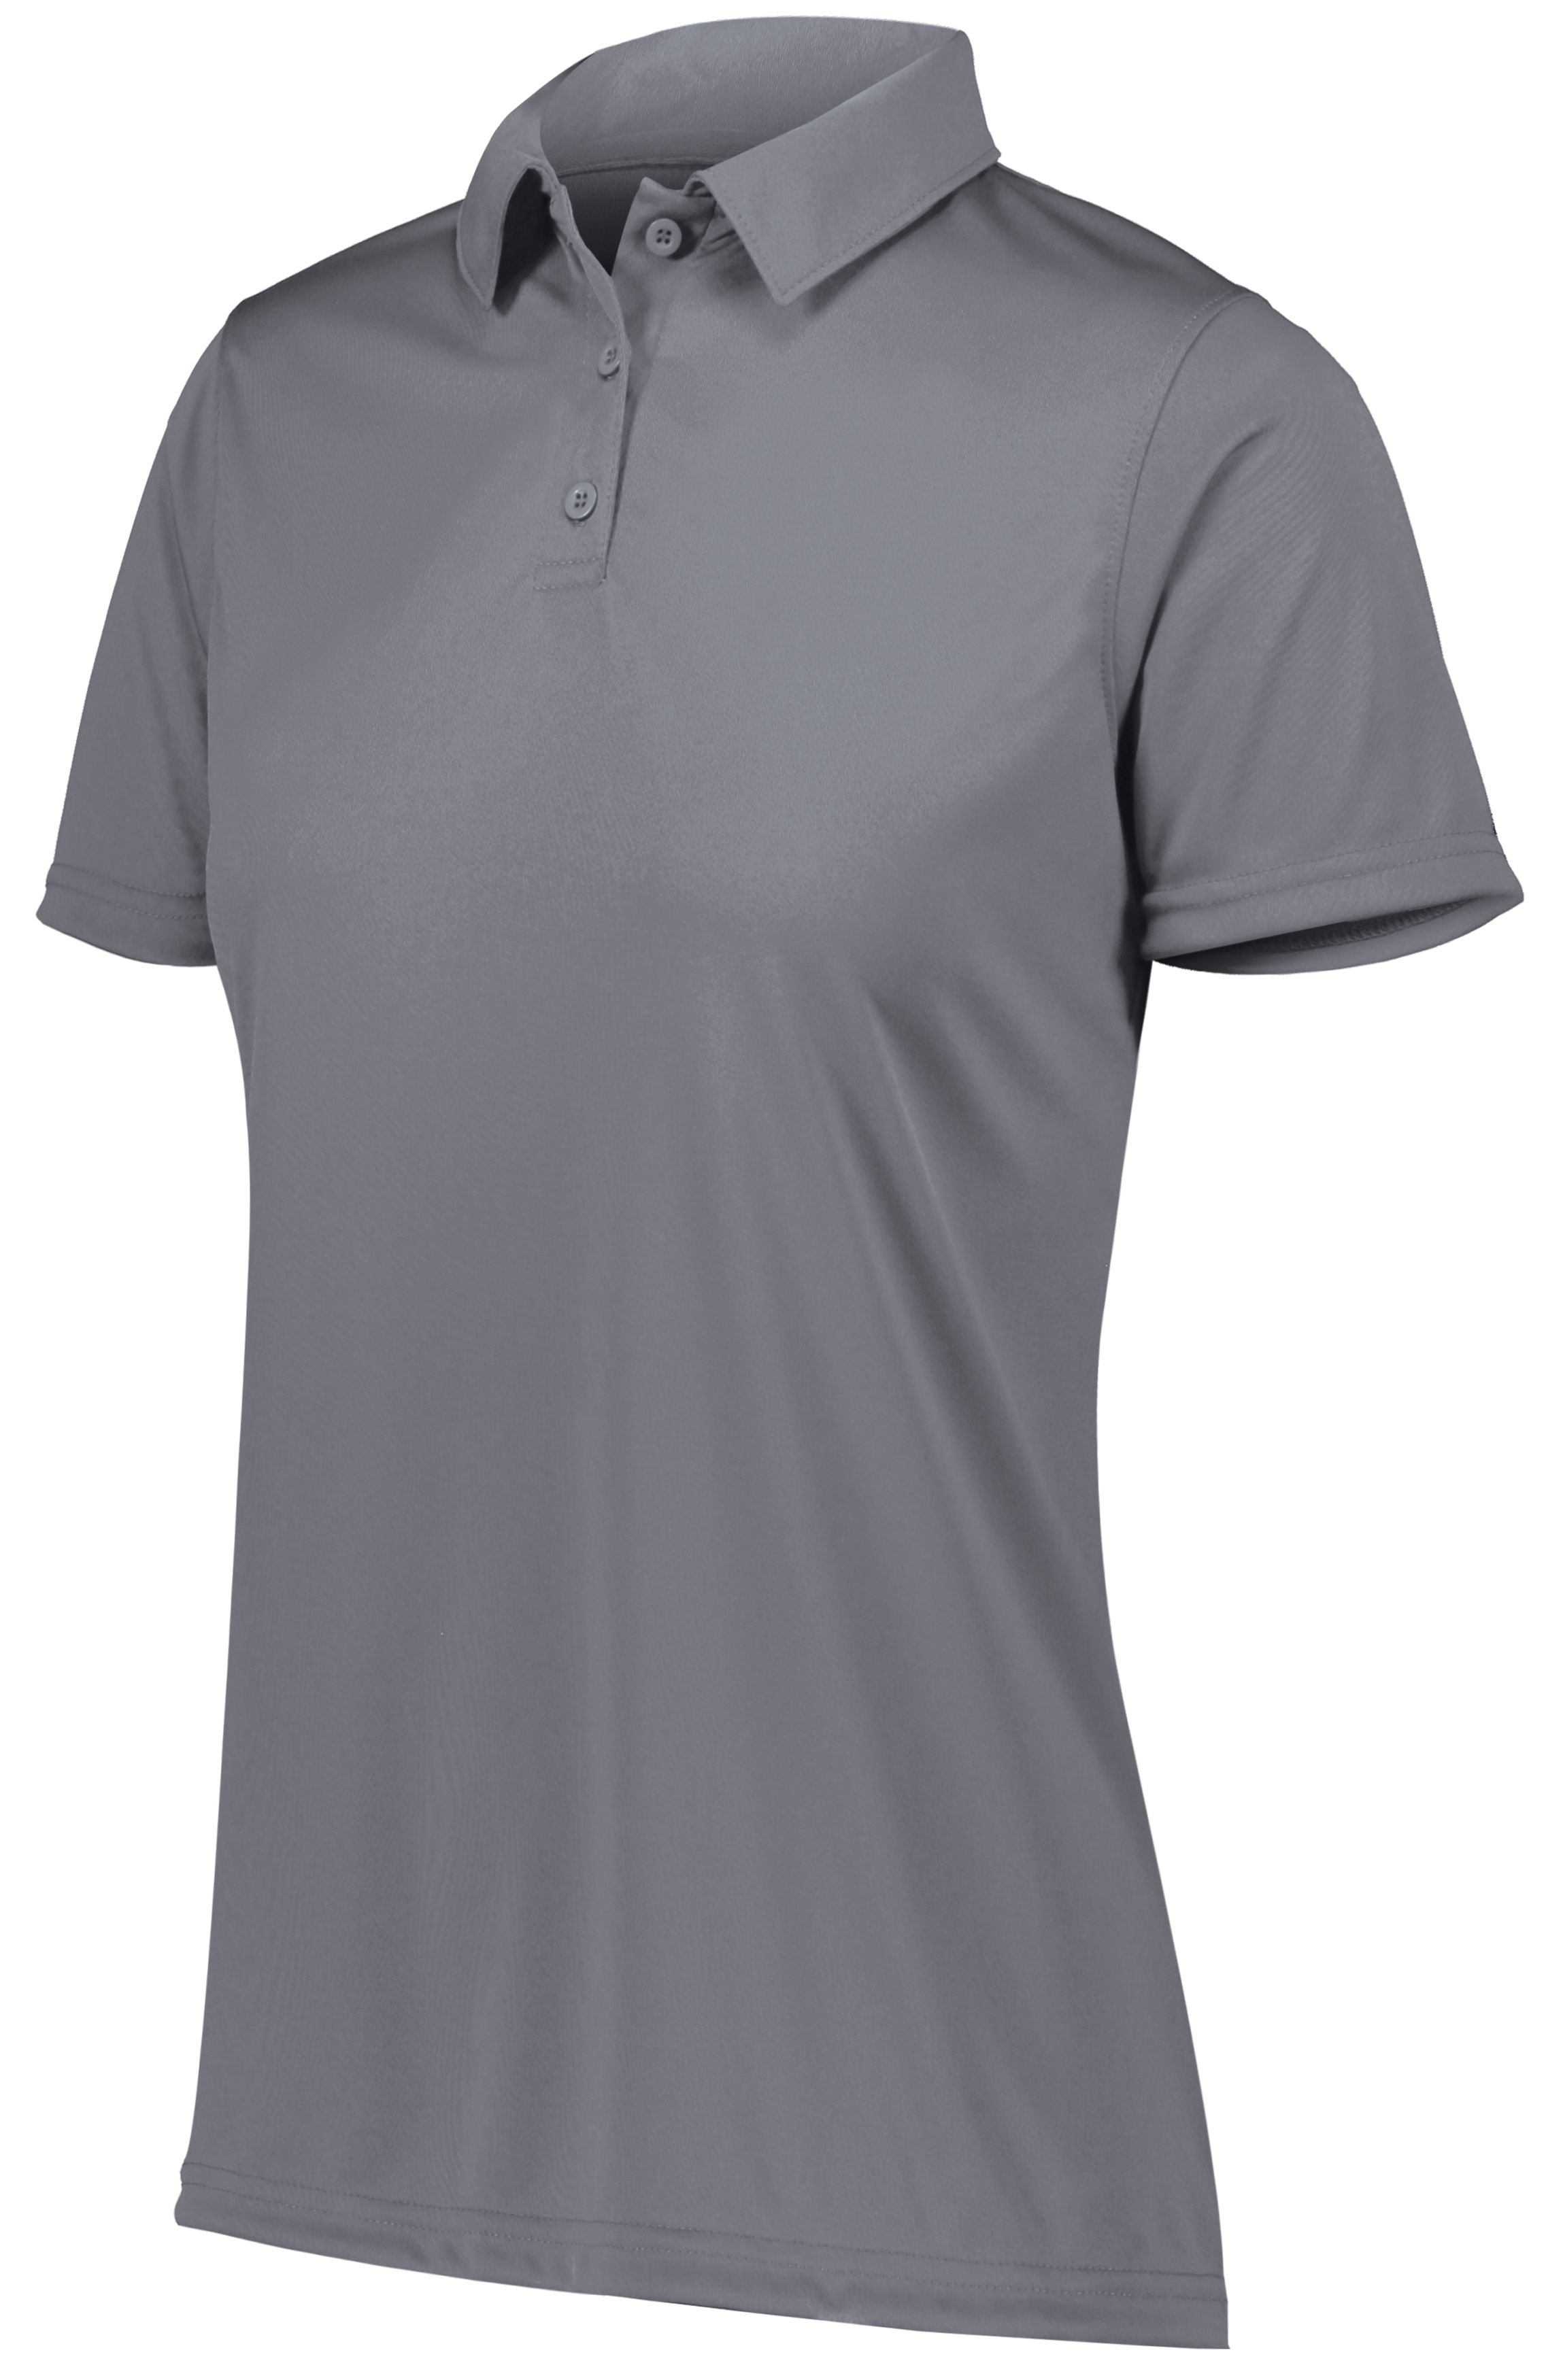 Augusta Sportswear Ladies Vital Polo in Graphite  -Part of the Ladies, Ladies-Polo, Polos, Augusta-Products, Shirts product lines at KanaleyCreations.com